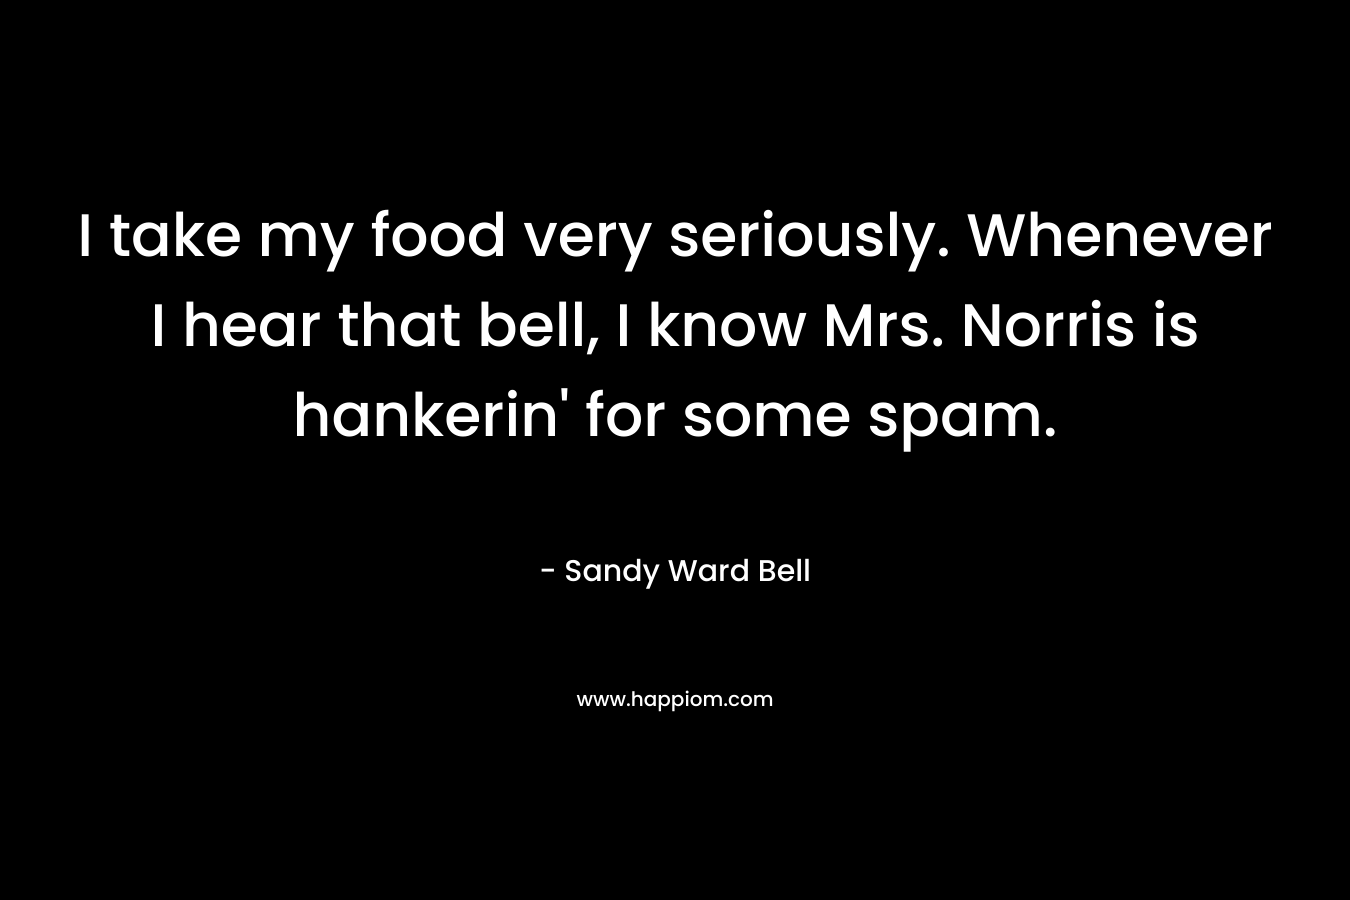 I take my food very seriously. Whenever I hear that bell, I know Mrs. Norris is hankerin' for some spam.